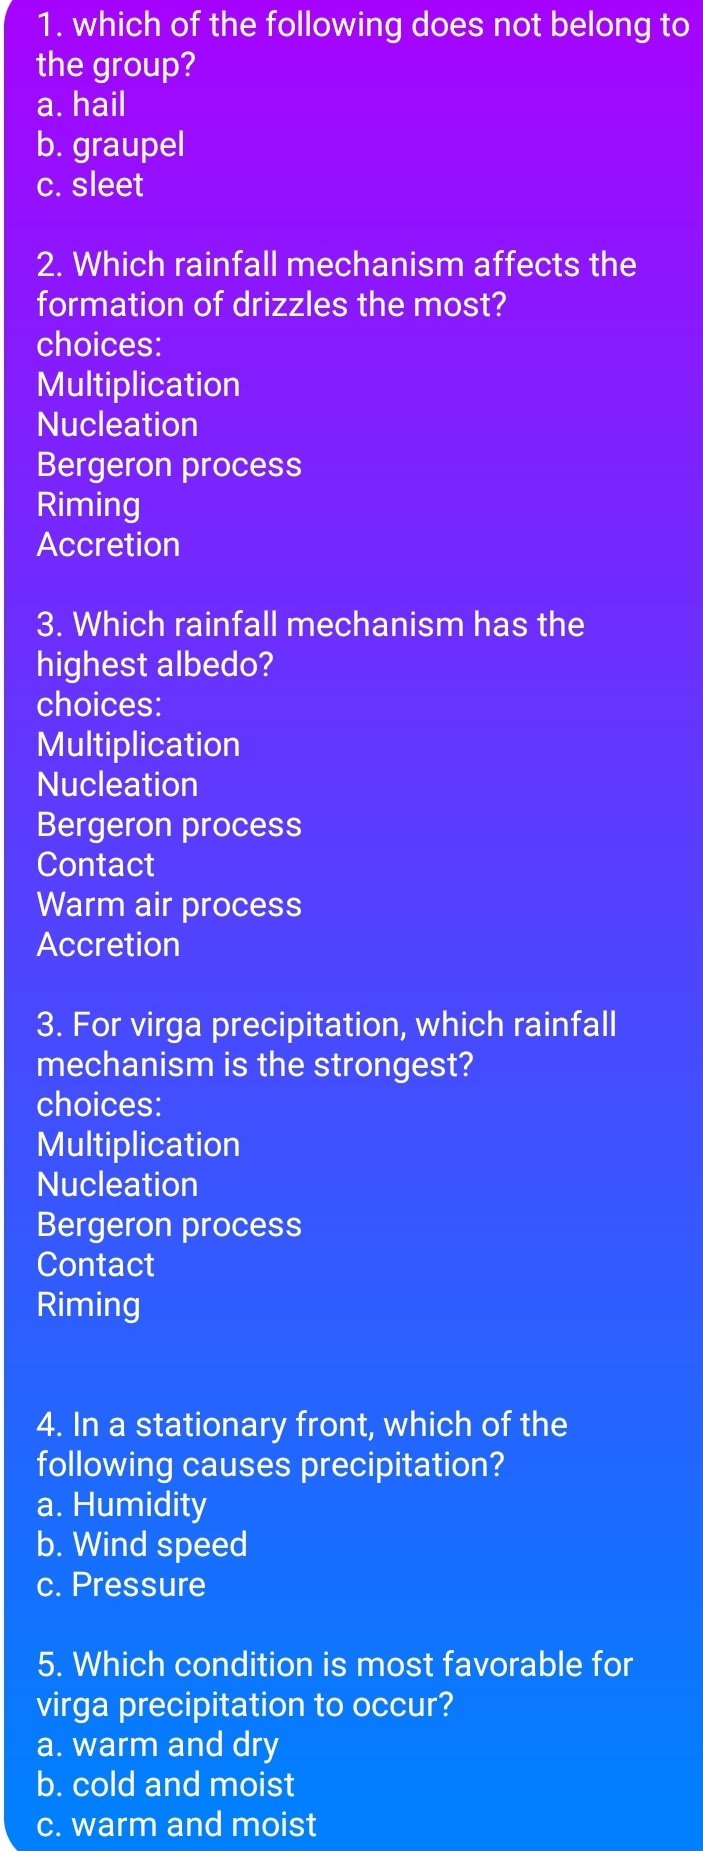 1. which of the following does not belong to
the group?
a. hail
b. graupel
C. sleet
2. Which rainfall mechanism affects the
formation of drizzles the most?
choices:
Multiplication
Nucleation
Bergeron process
Riming
Accretion
3. Which rainfall mechanism has the
highest albedo?
choices:
Multiplication
Nucleation
Bergeron process
Contact
Warm air process
Accretion
3. For virga precipitation, which rainfall
mechanism is the strongest?
choices:
Multiplication
Nucleation
Bergeron process
Contact
Riming
4. In a stationary front, which of the
following causes precipitation?
a. Humidity
b. Wind speed
c. Pressure
5. Which condition is most favorable for
virga precipitation to occur?
a. warm and dry
b. cold and moist
C. warm and moist
